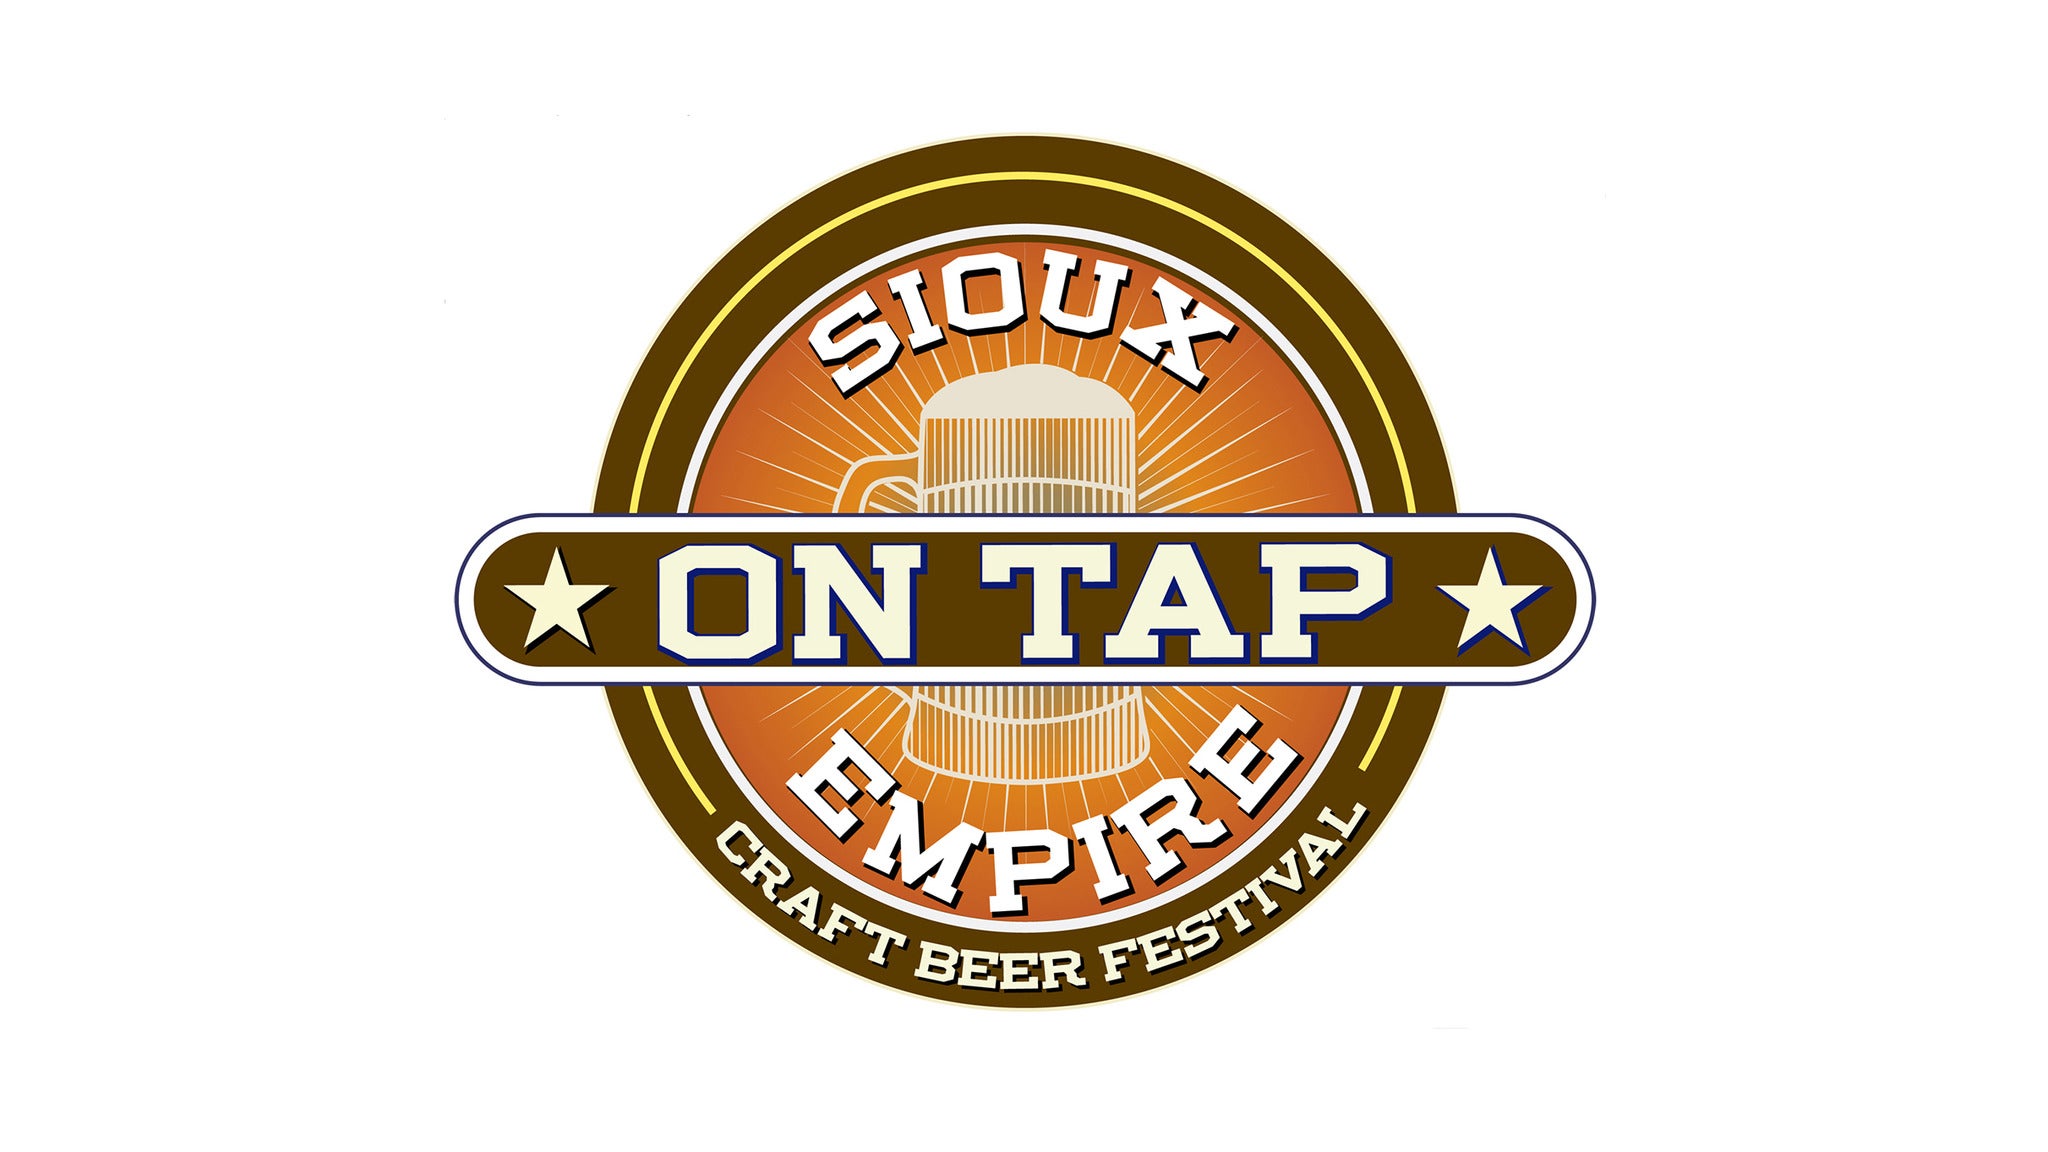 Sioux Empire On Tap in Sioux Falls promo photo for Tier 2 Pricing presale offer code